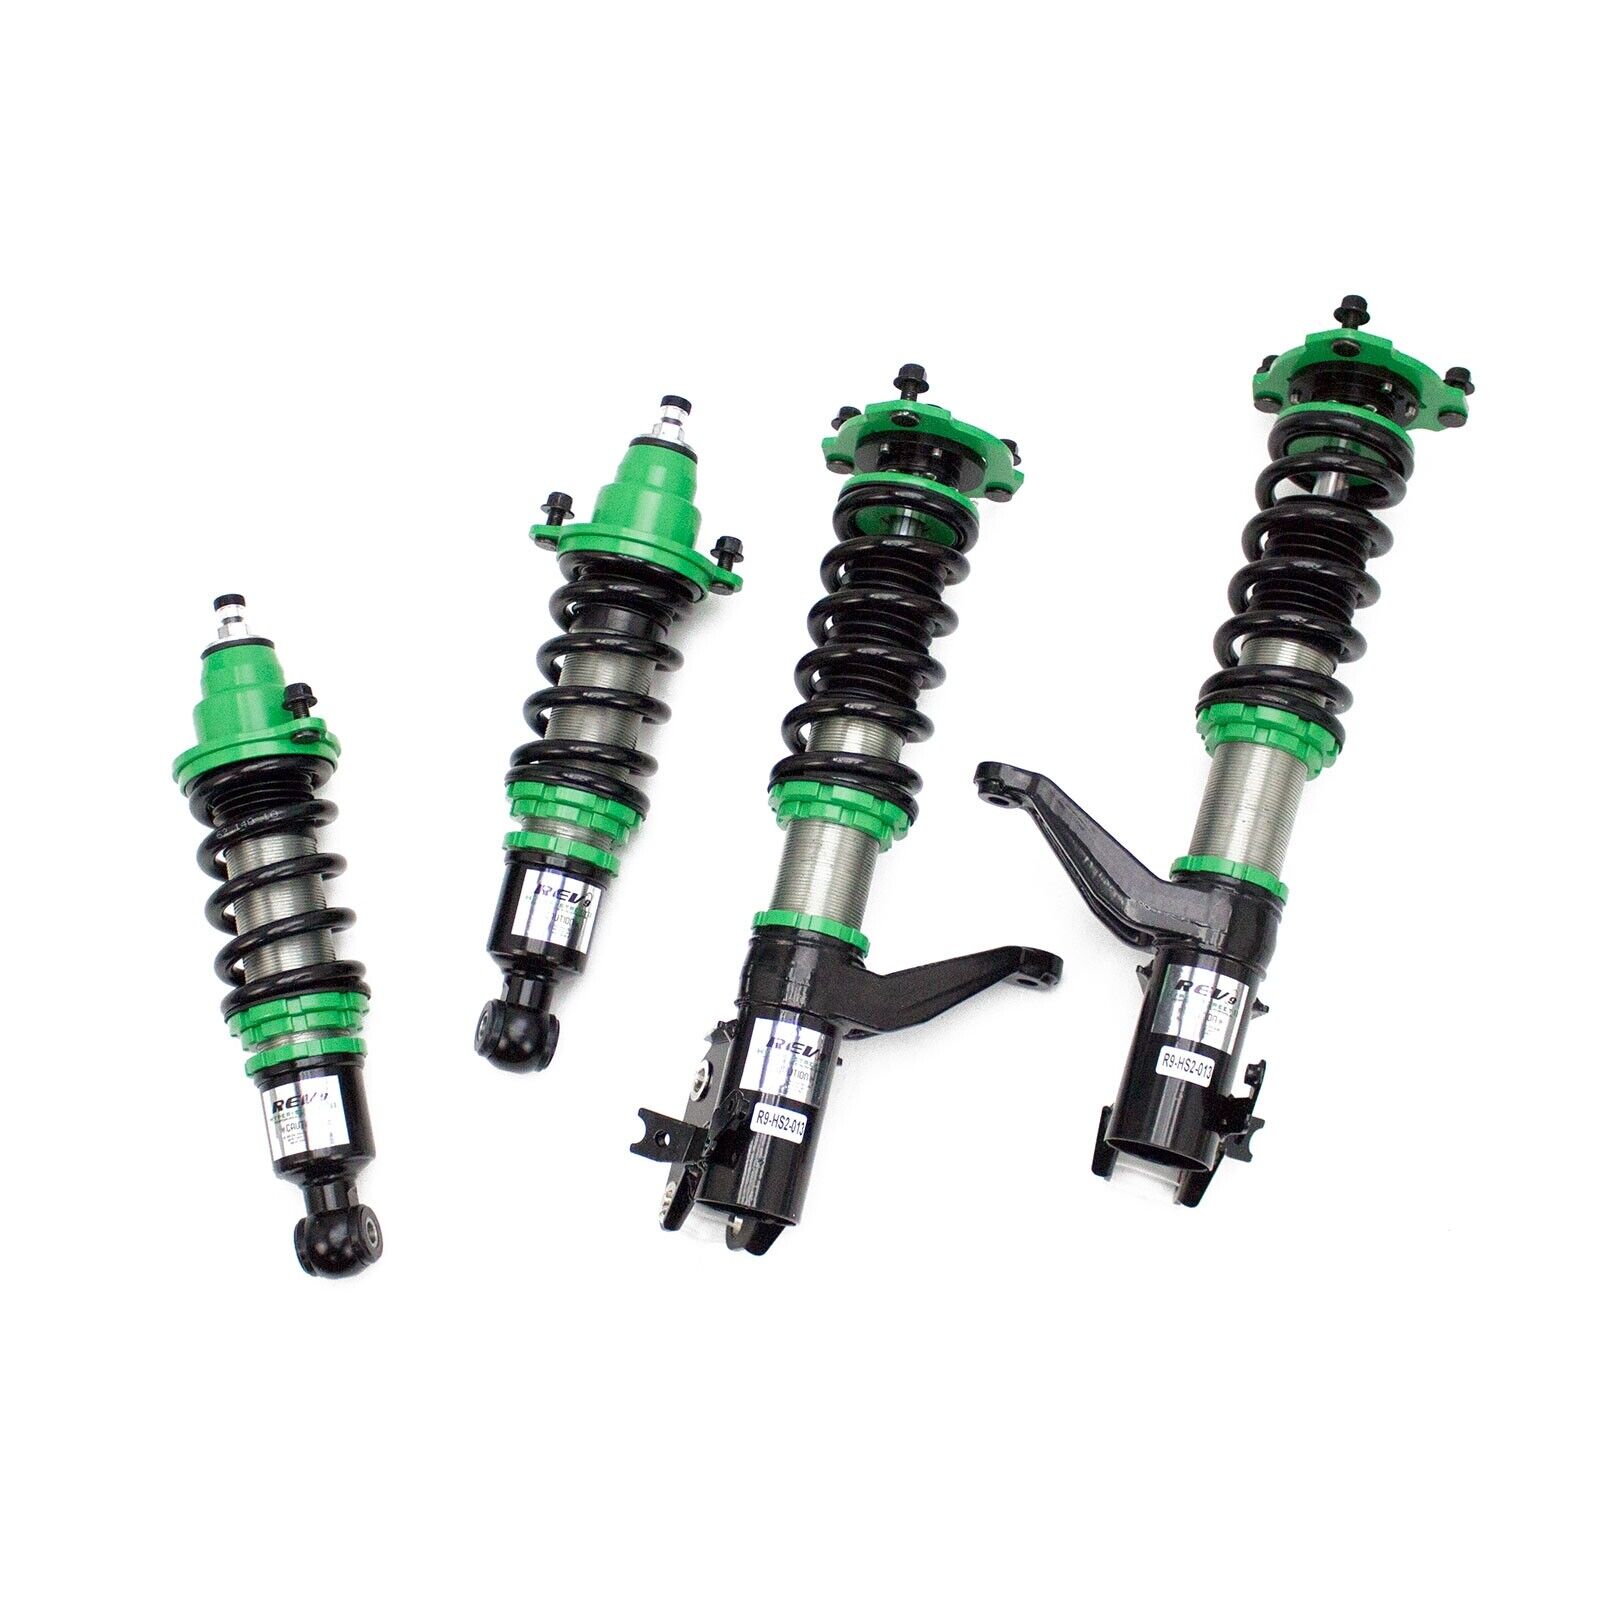 Godspeed Hyper-Street II Coilover Kit 32 Way for RSX(DC5) 2002-06